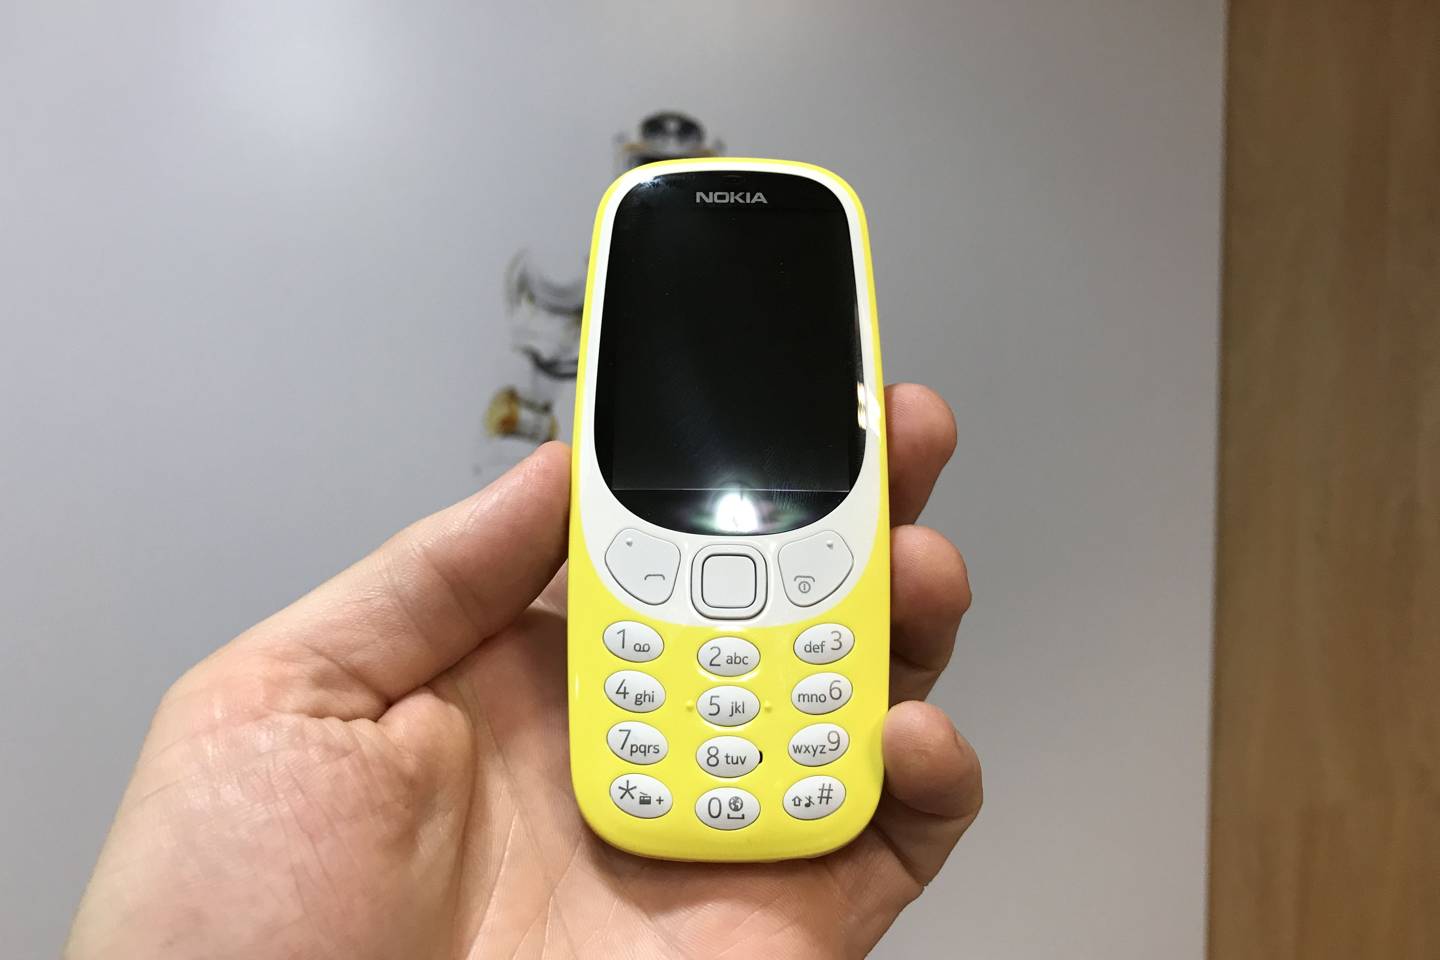 Nokia 3310 review: reliving your youth is fun for five minutes